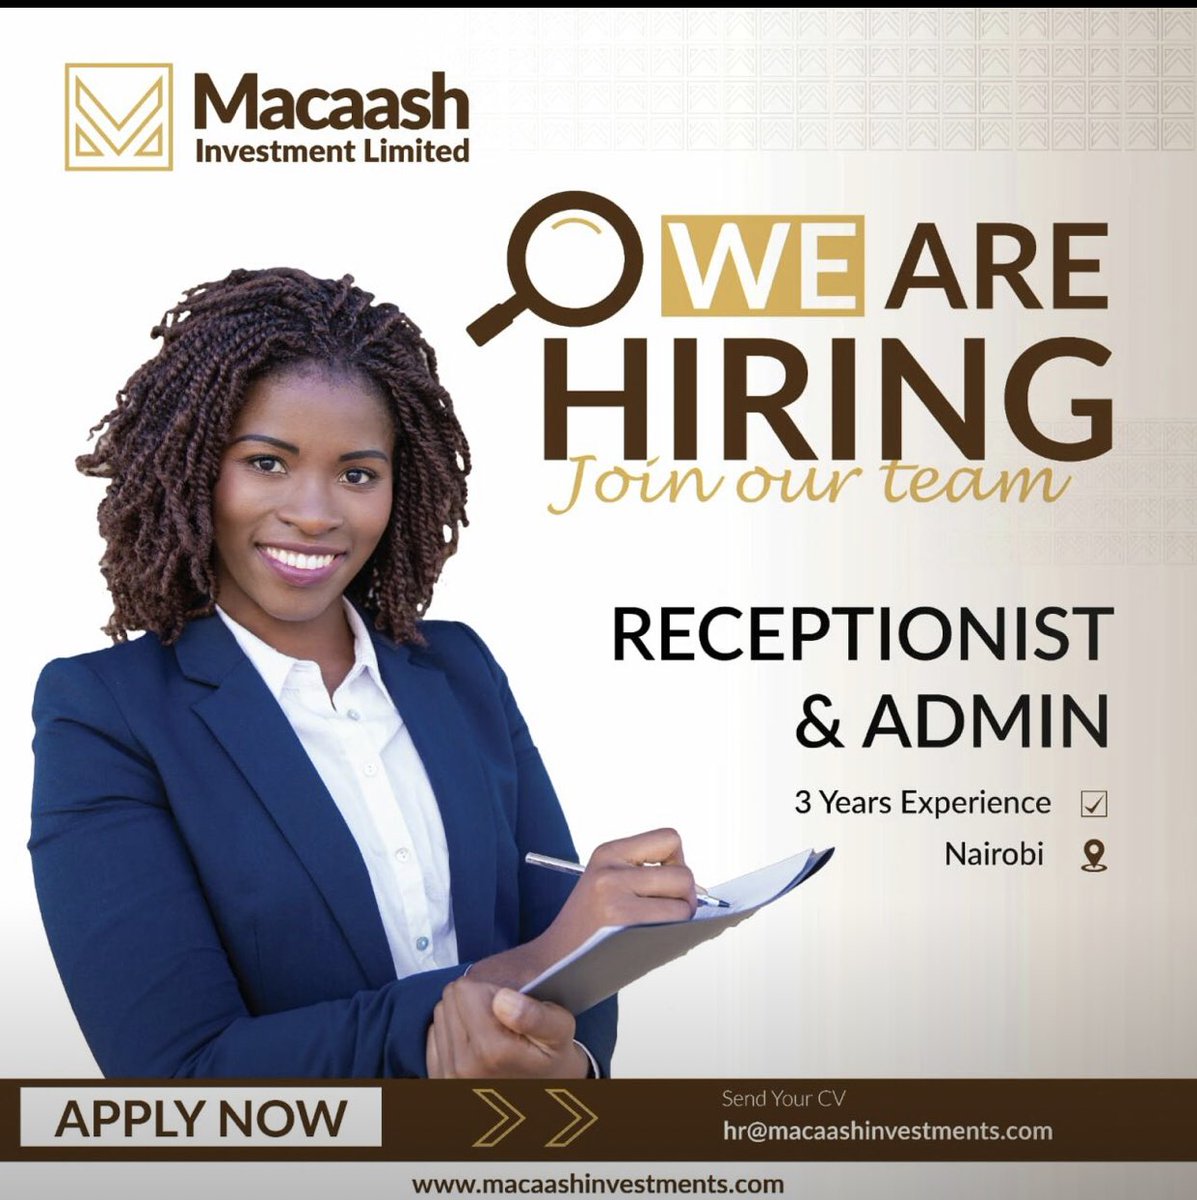 Macaash Investment limited is a real estate company in Parklands, Nairobi. kindly apply, thanks. Deadline of application is Friday 2nd February 2024
#Hiringimmediately #jobforyou